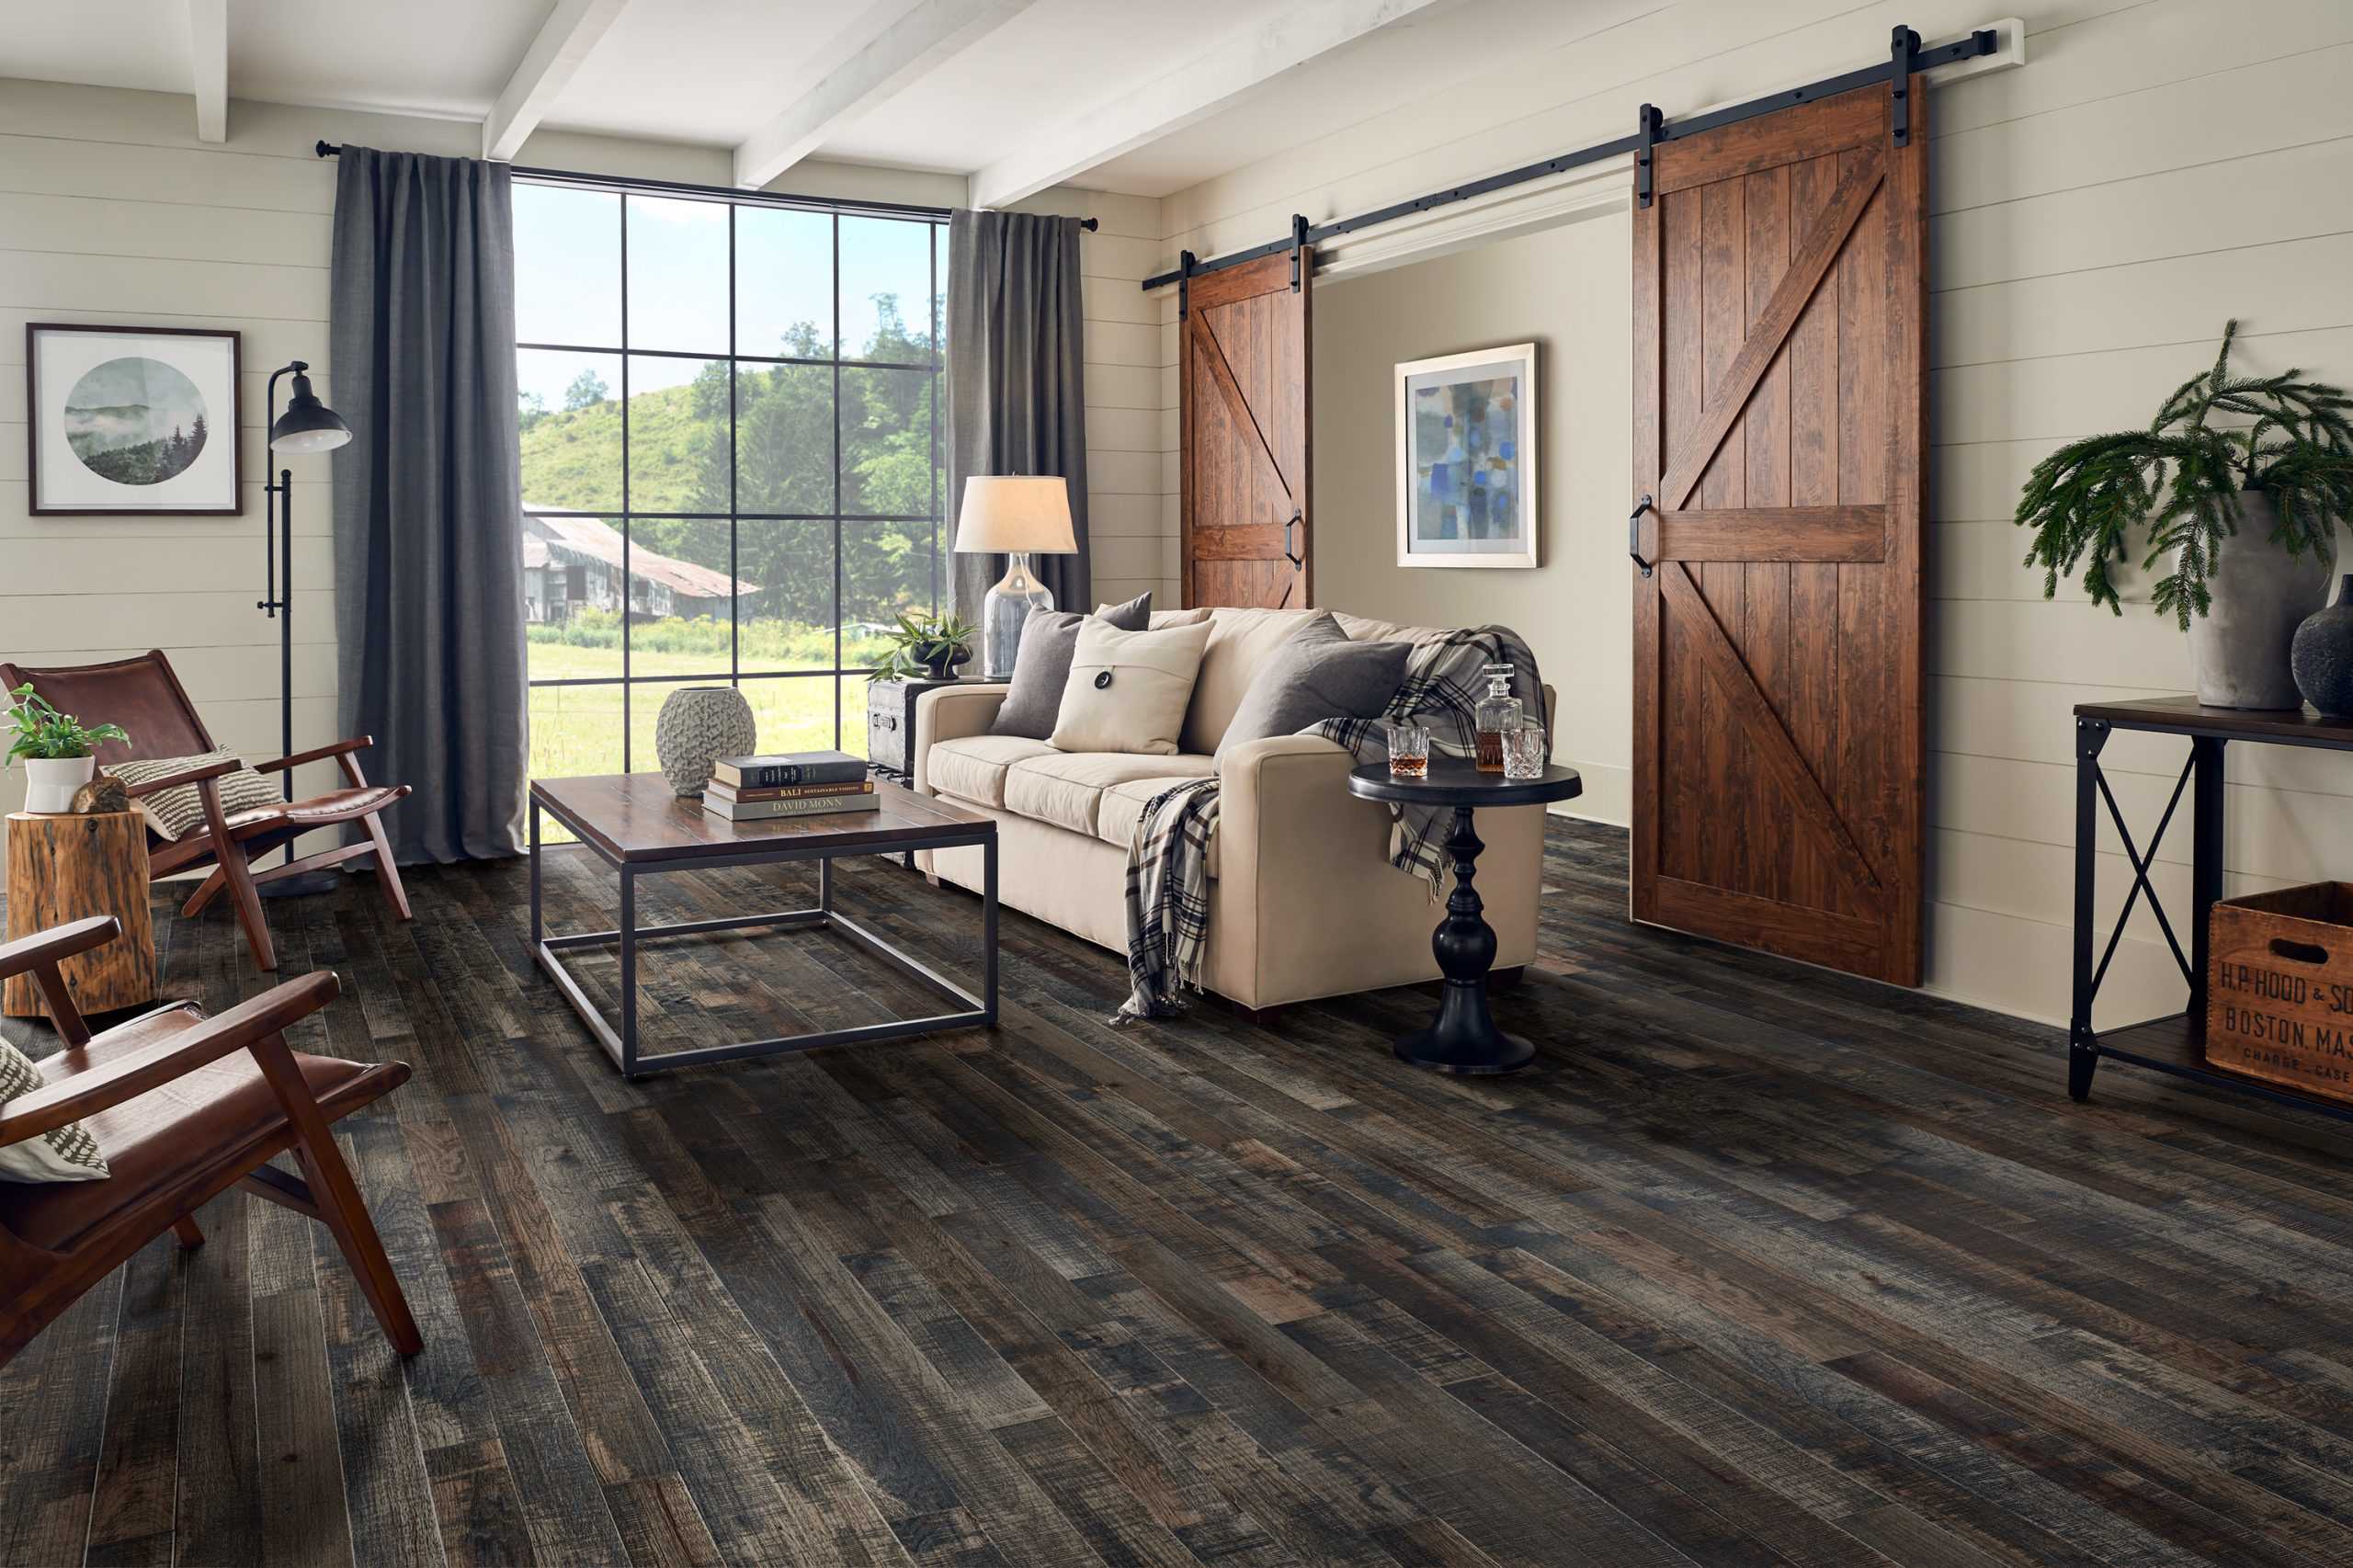 Mark Bowe SHMB39L46X Wyoming Room Scene with a solid hickory hardwood floor